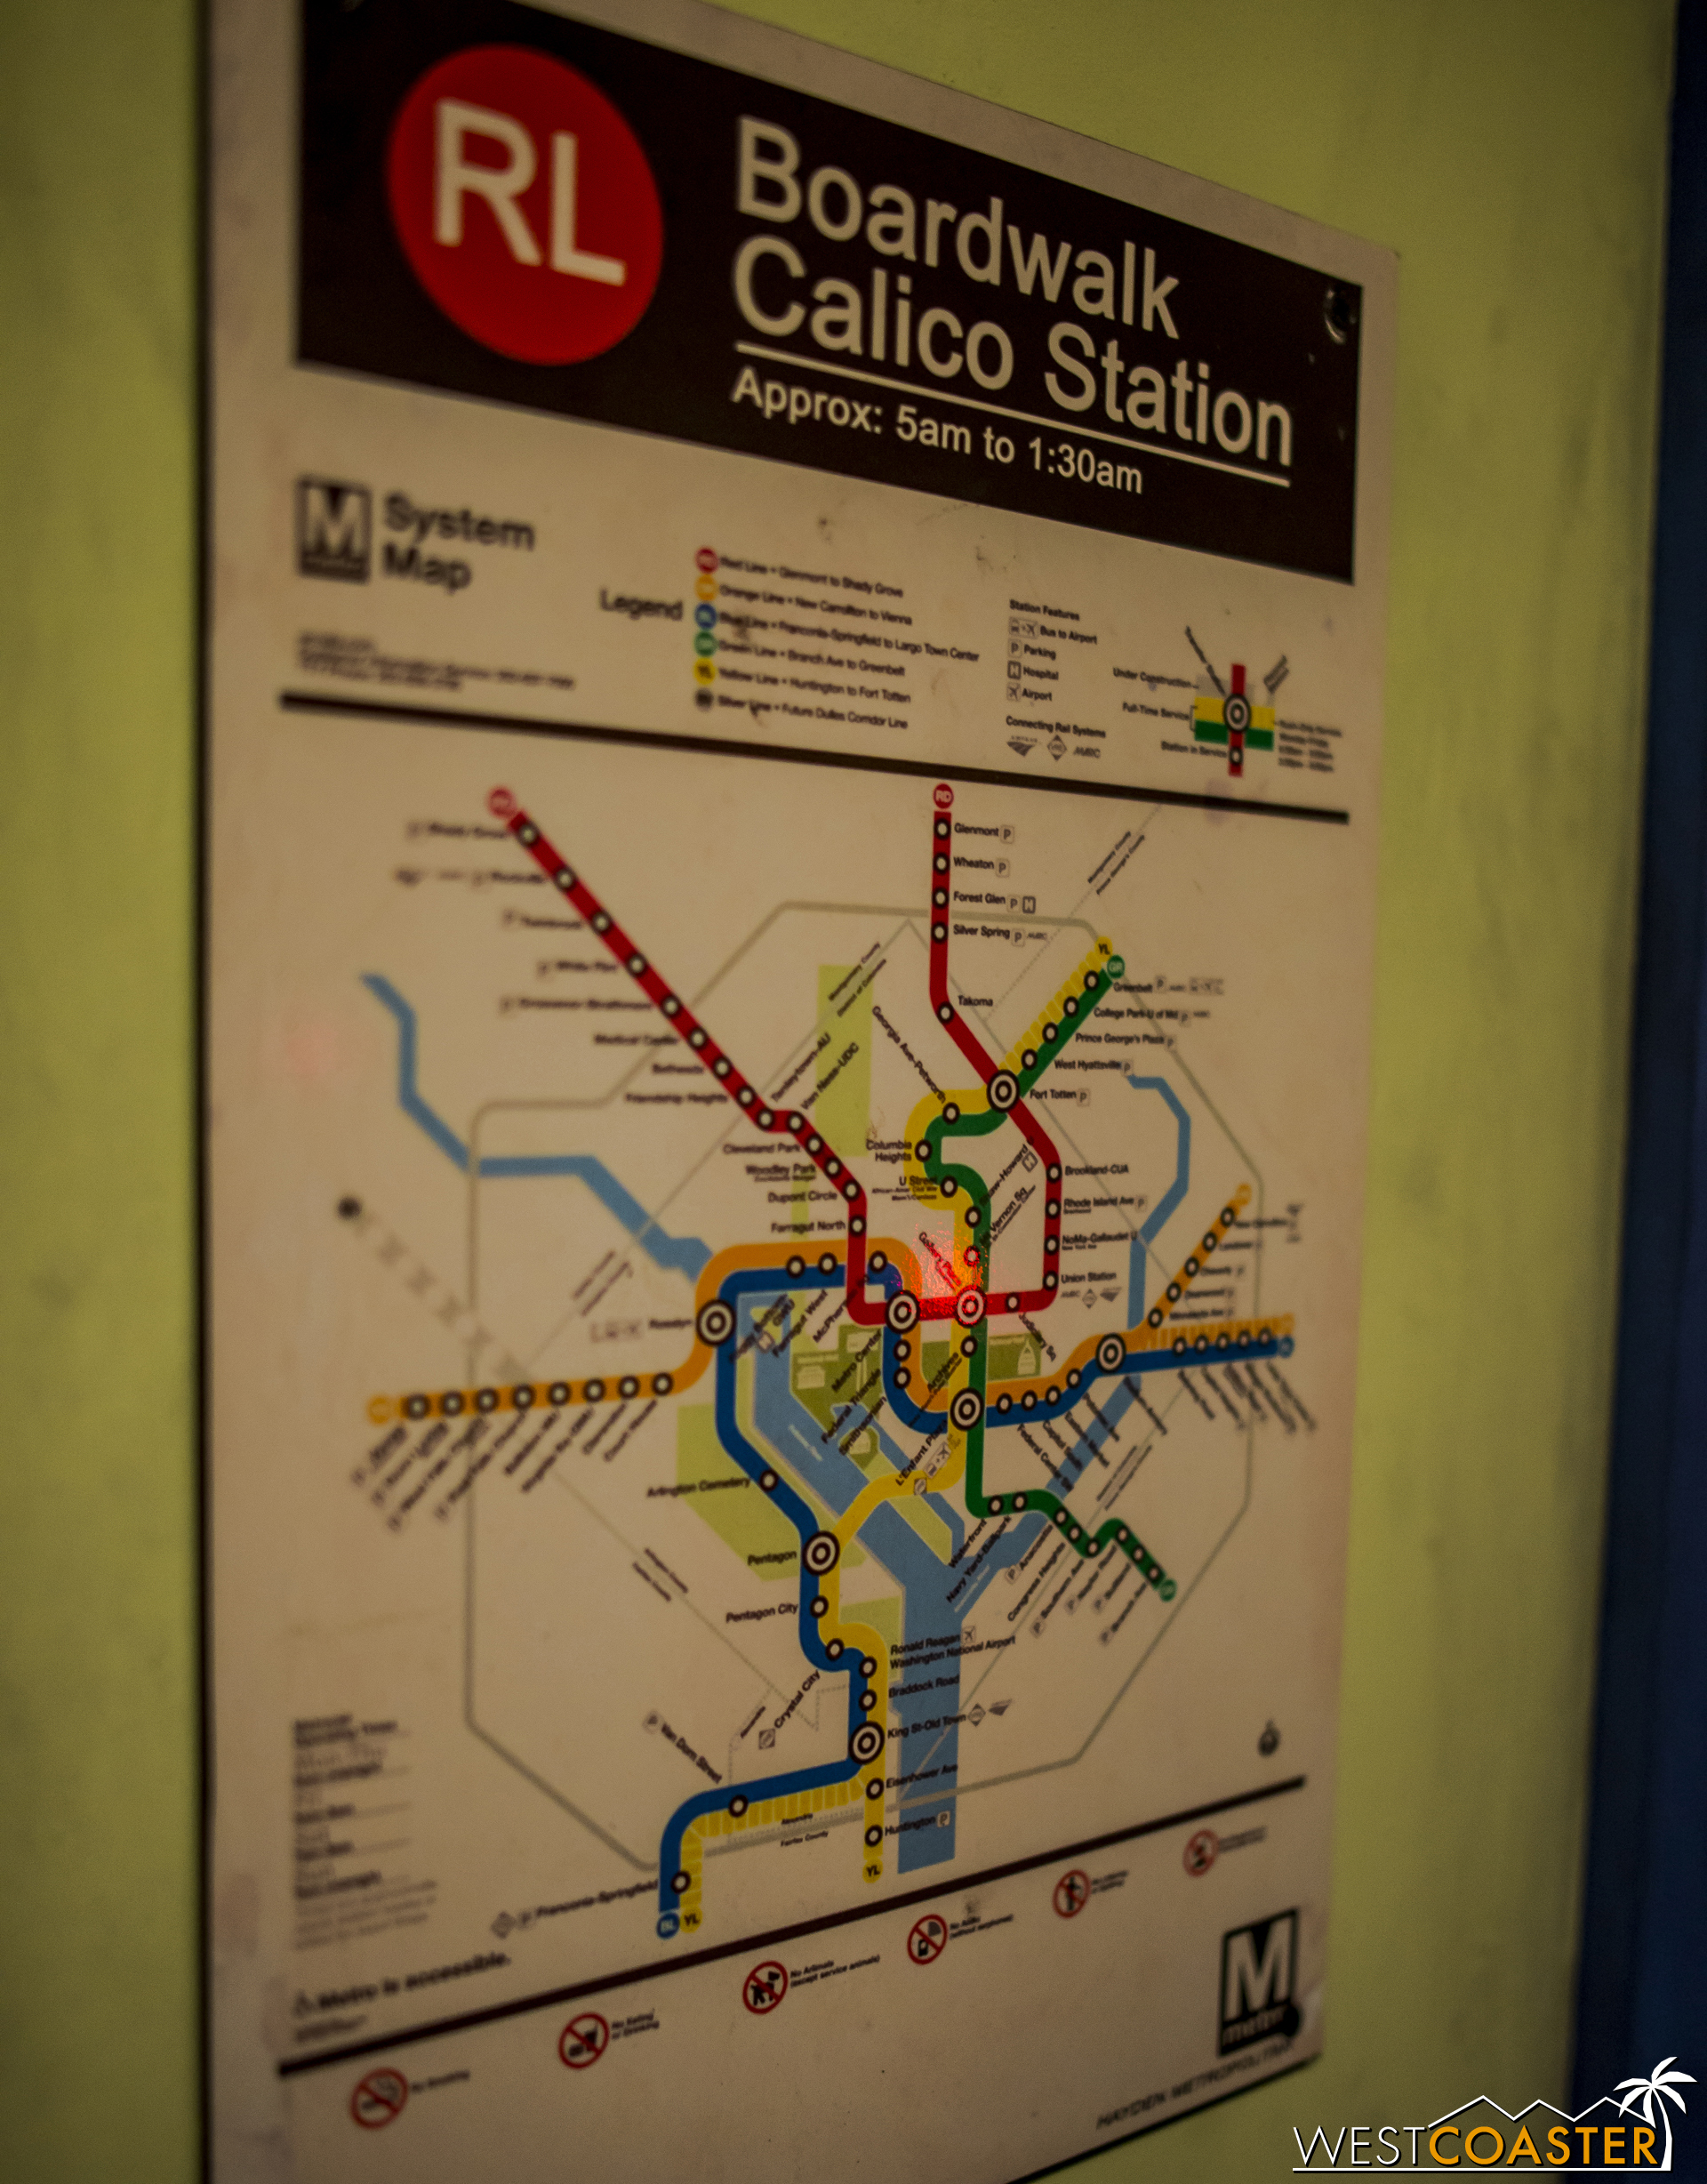  I initially thought this was a custom map, but second glance, I guess Calico is actually Washington DC! 